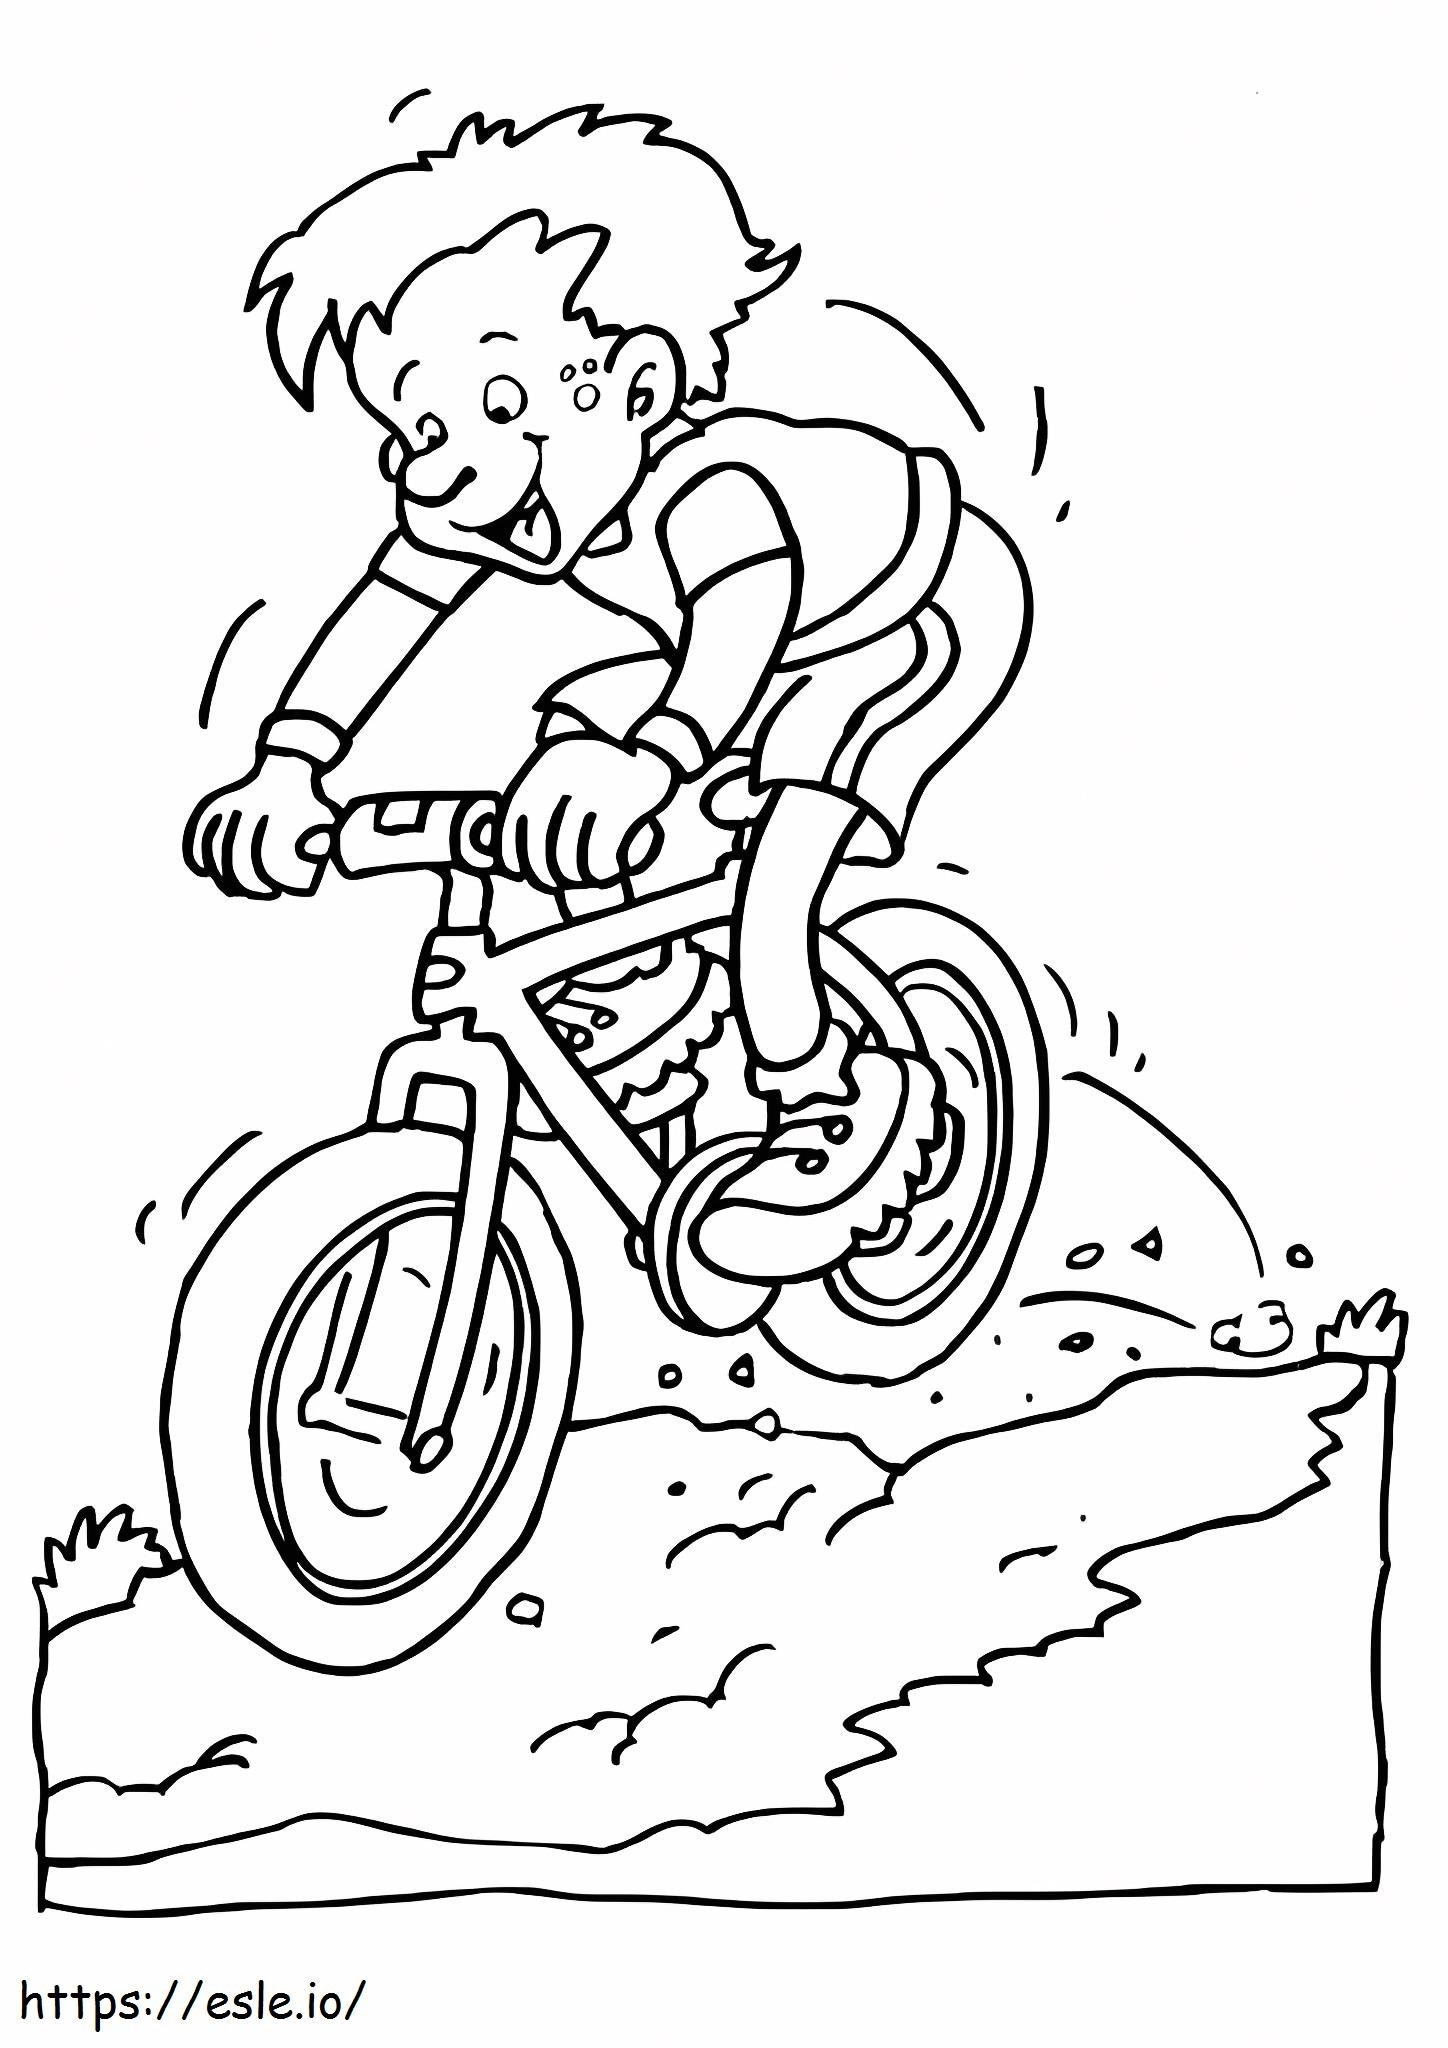 Cycling Funny Boy coloring page